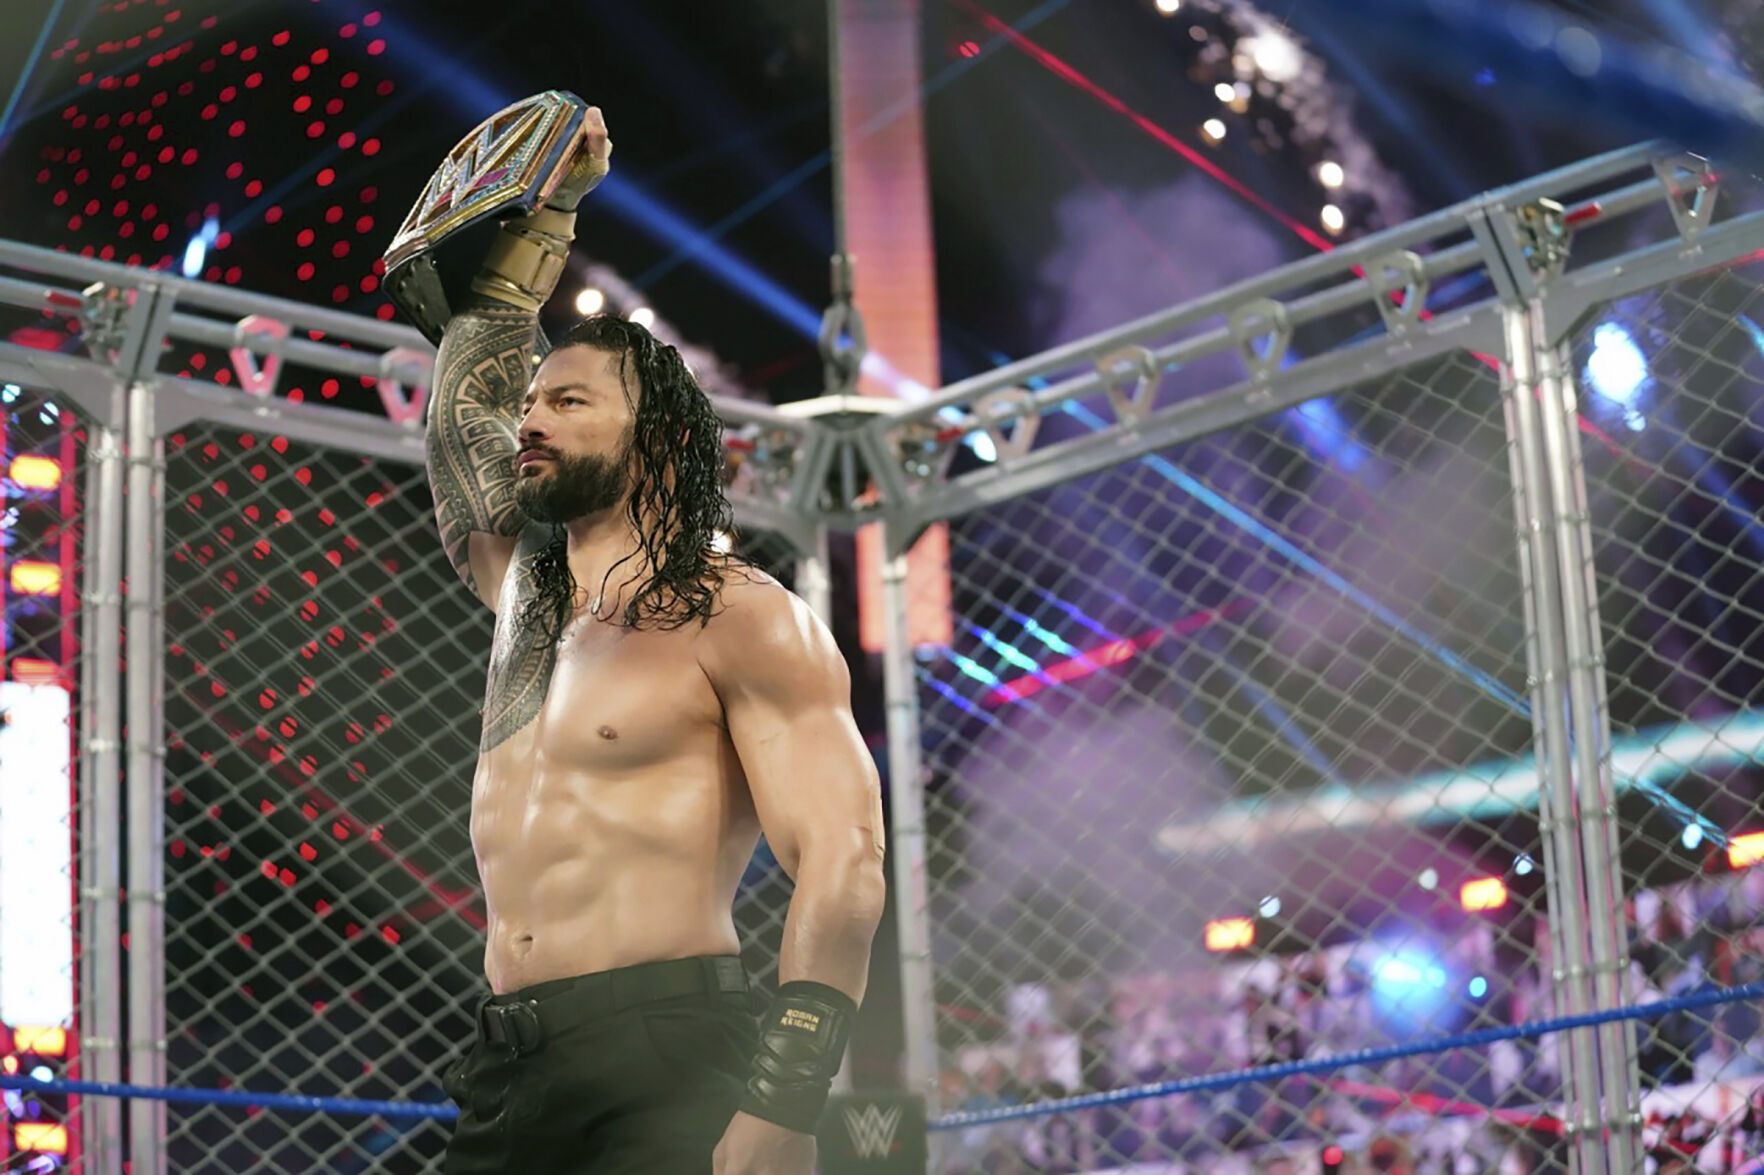 <p>Roman Reigns holds up the WWE Universal Championship after defeating Jey Uso during a match on Oct. 25, 2020, in Orlando, Florida. Reigns and Cody Rhodes will be in the main event of WrestleMania 39 on April 2, 2023, in Los Angeles. (WWE via AP)</p>   PHOTO CREDIT: WWE